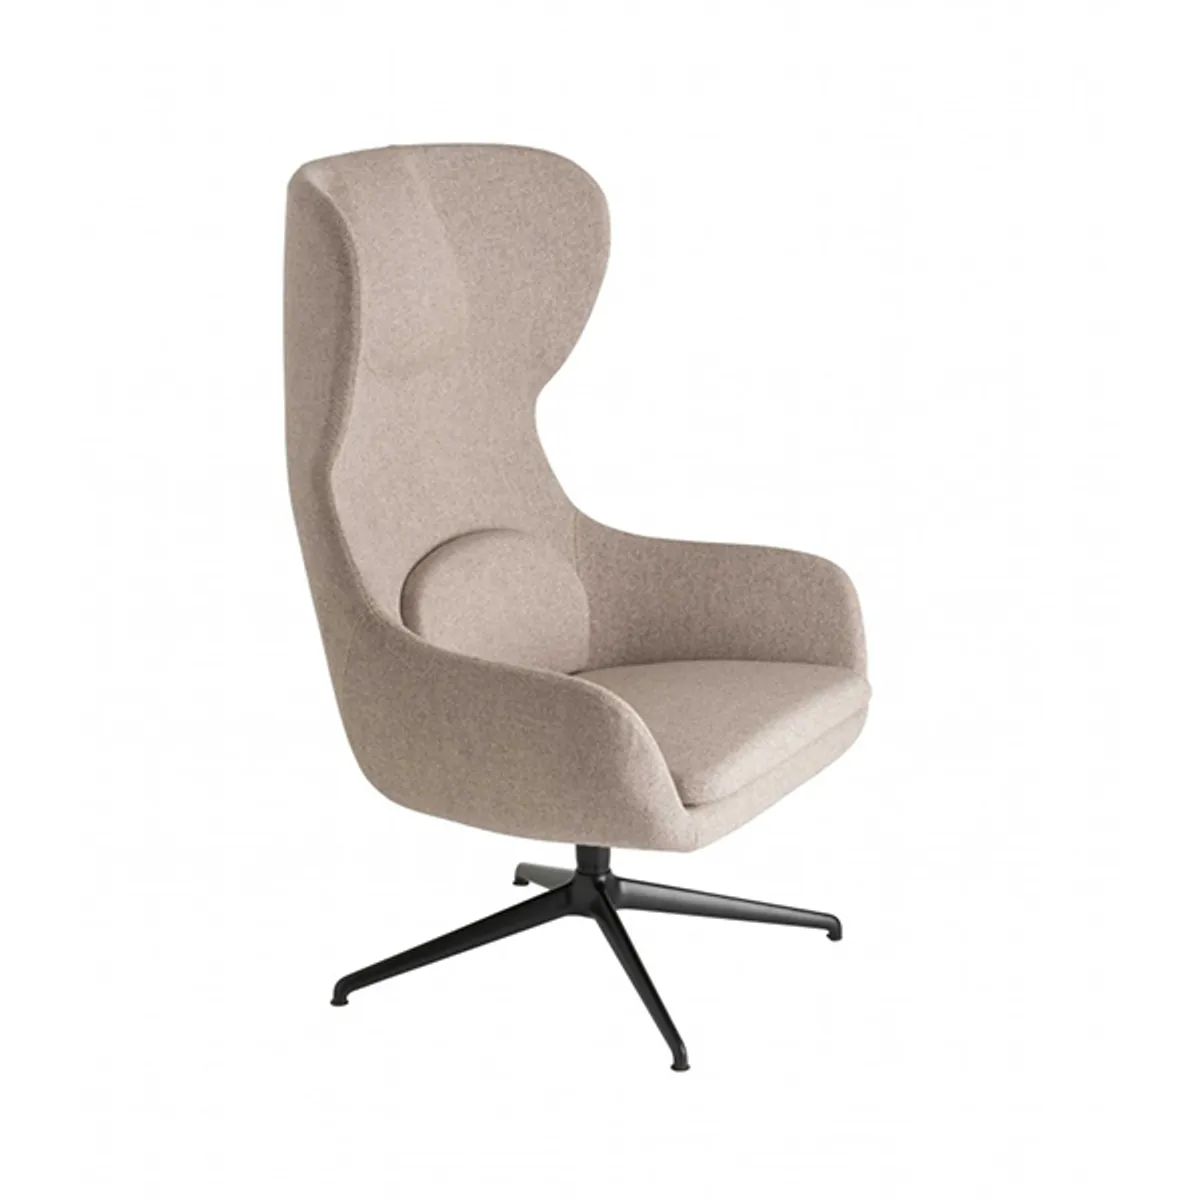 Myra High Wing Back Chair With Spider Base 683 2